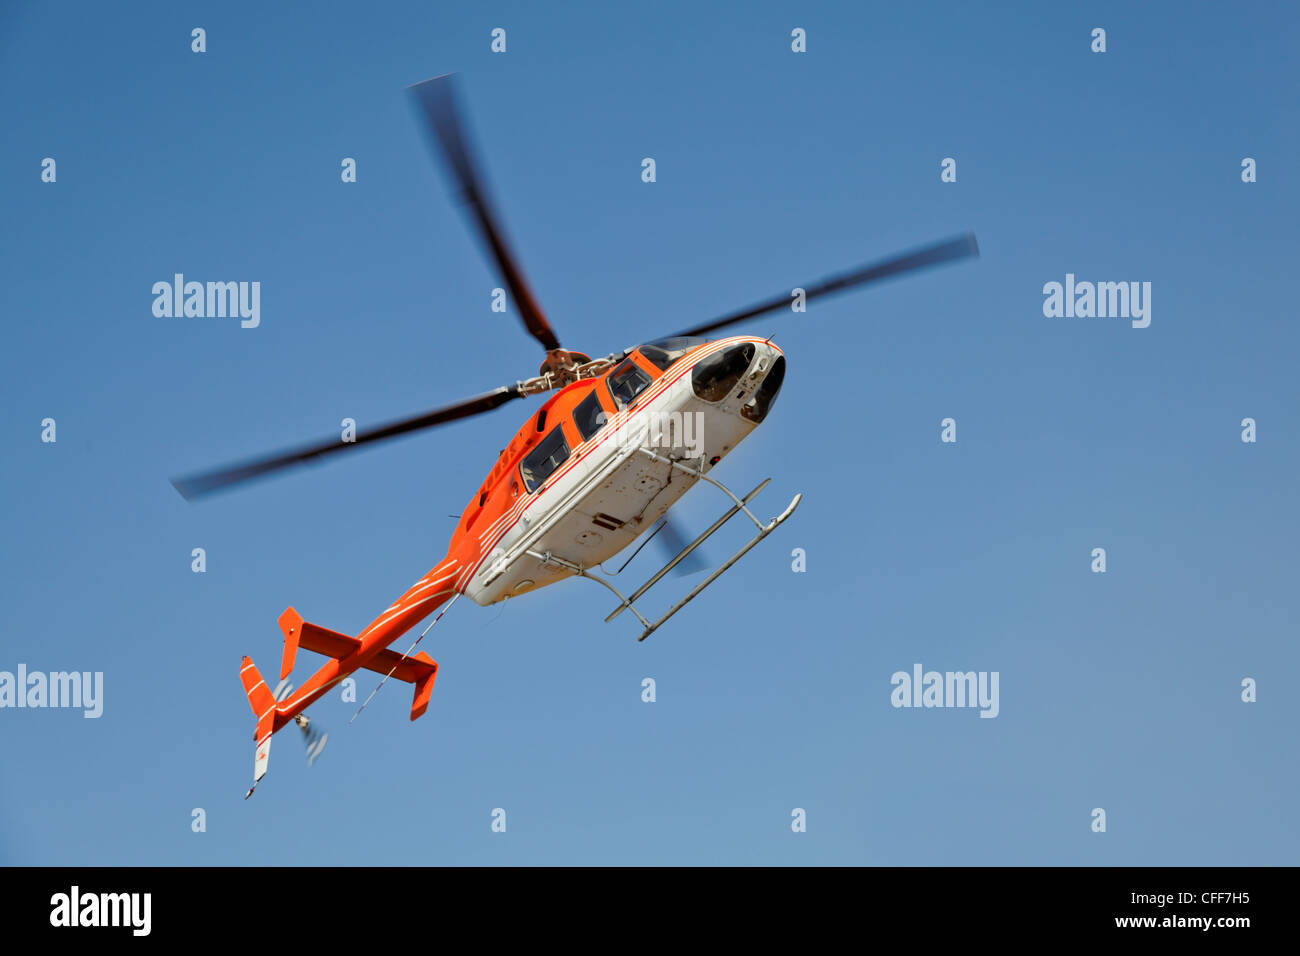 hovering orange and white helicopter in clear blue sky over Katra Heliport in Northern Indian Himalayas, photograph rendition Stock Photo